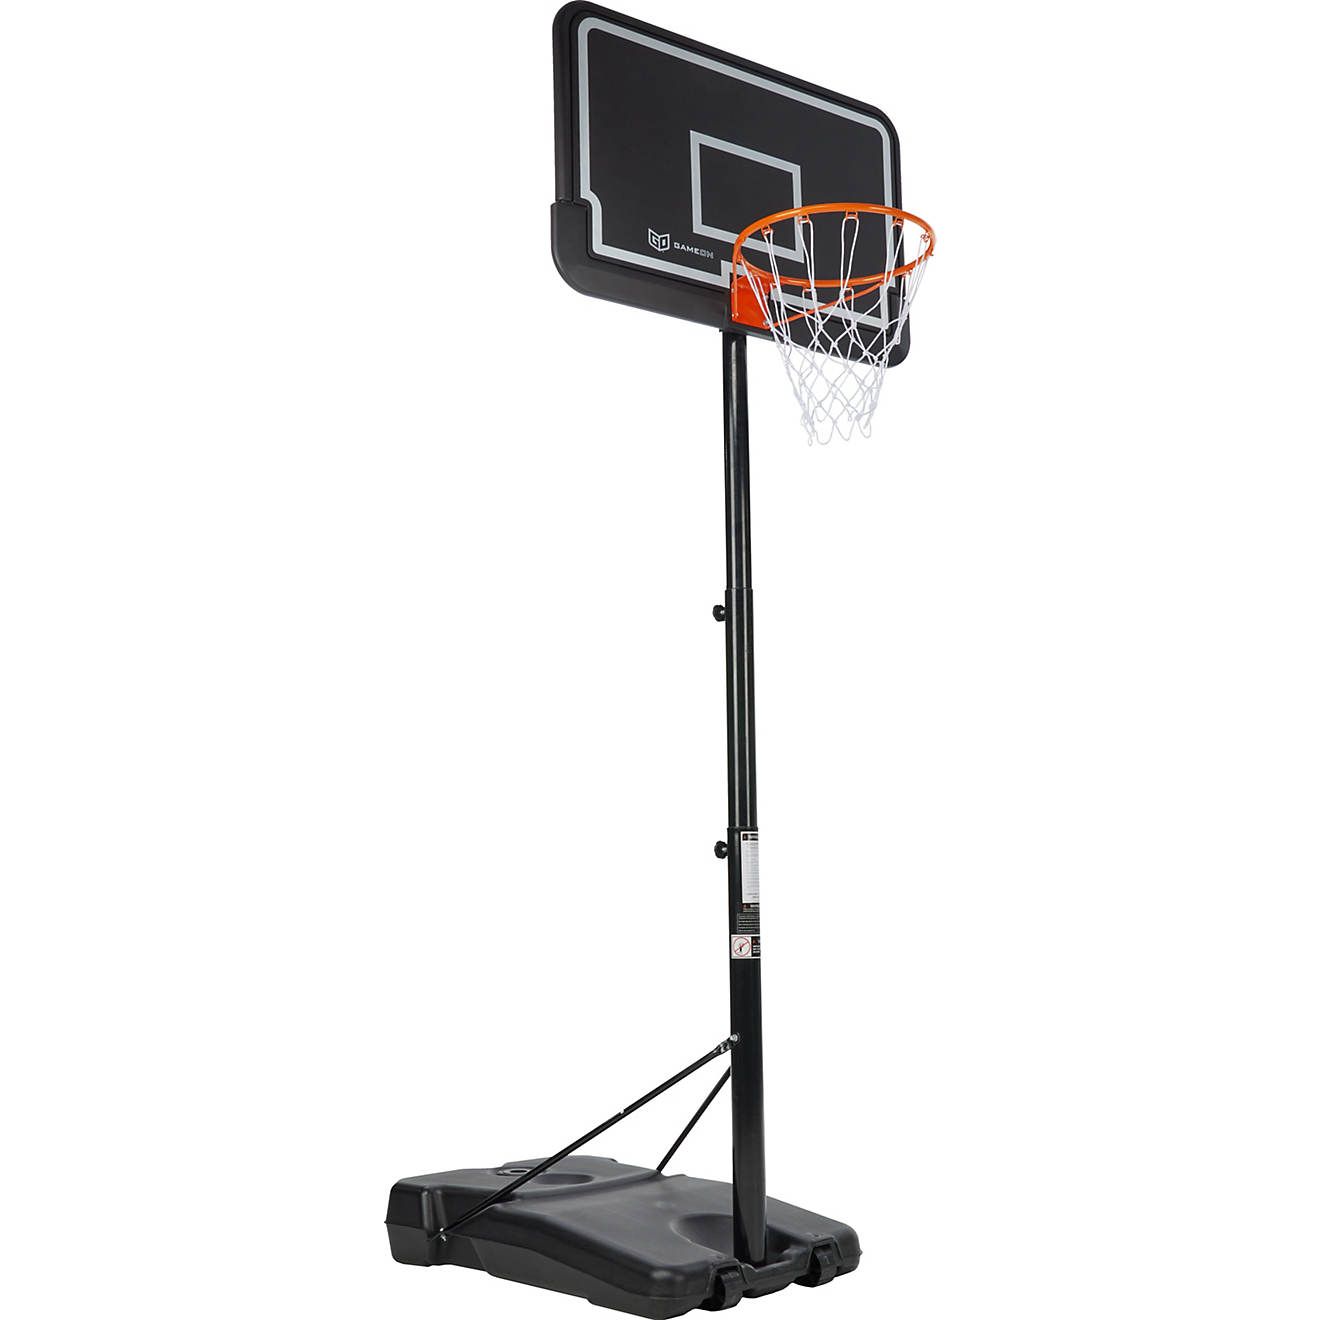 Game On 44 Portable Basketball Hoop | Academy Sports + Outdoors